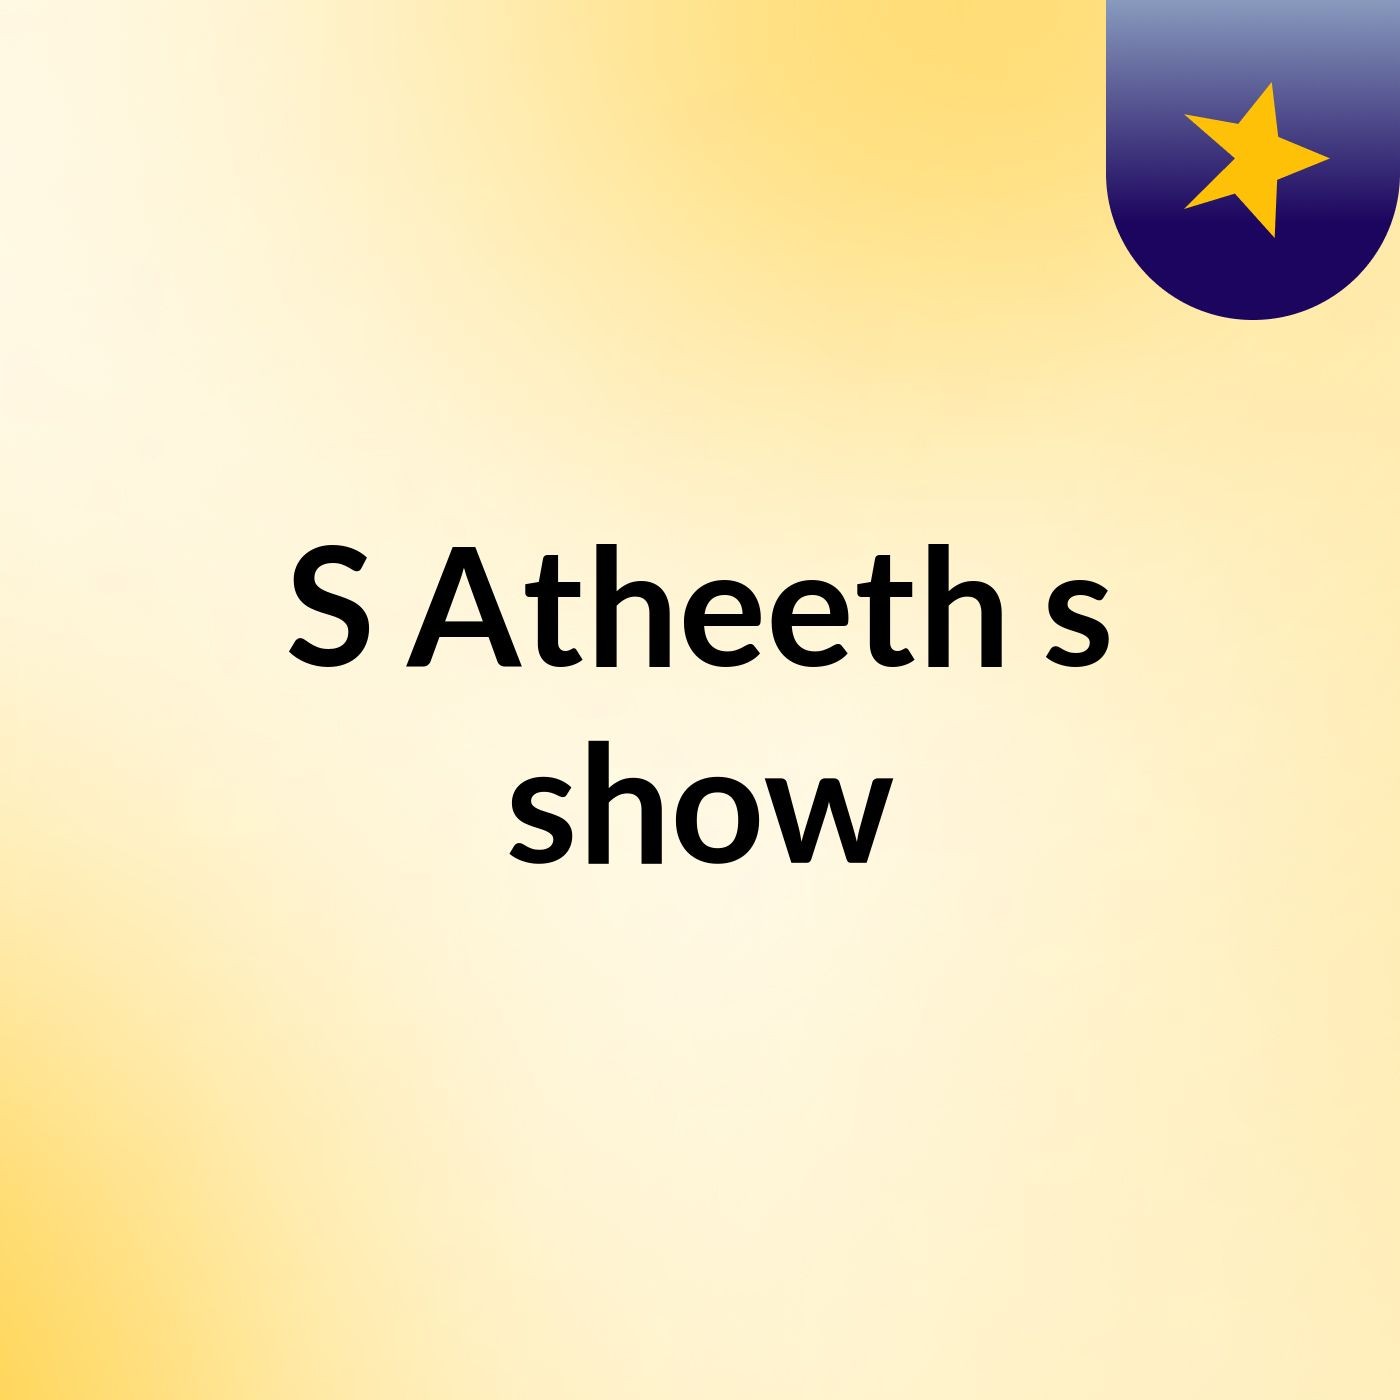 S Atheeth's show